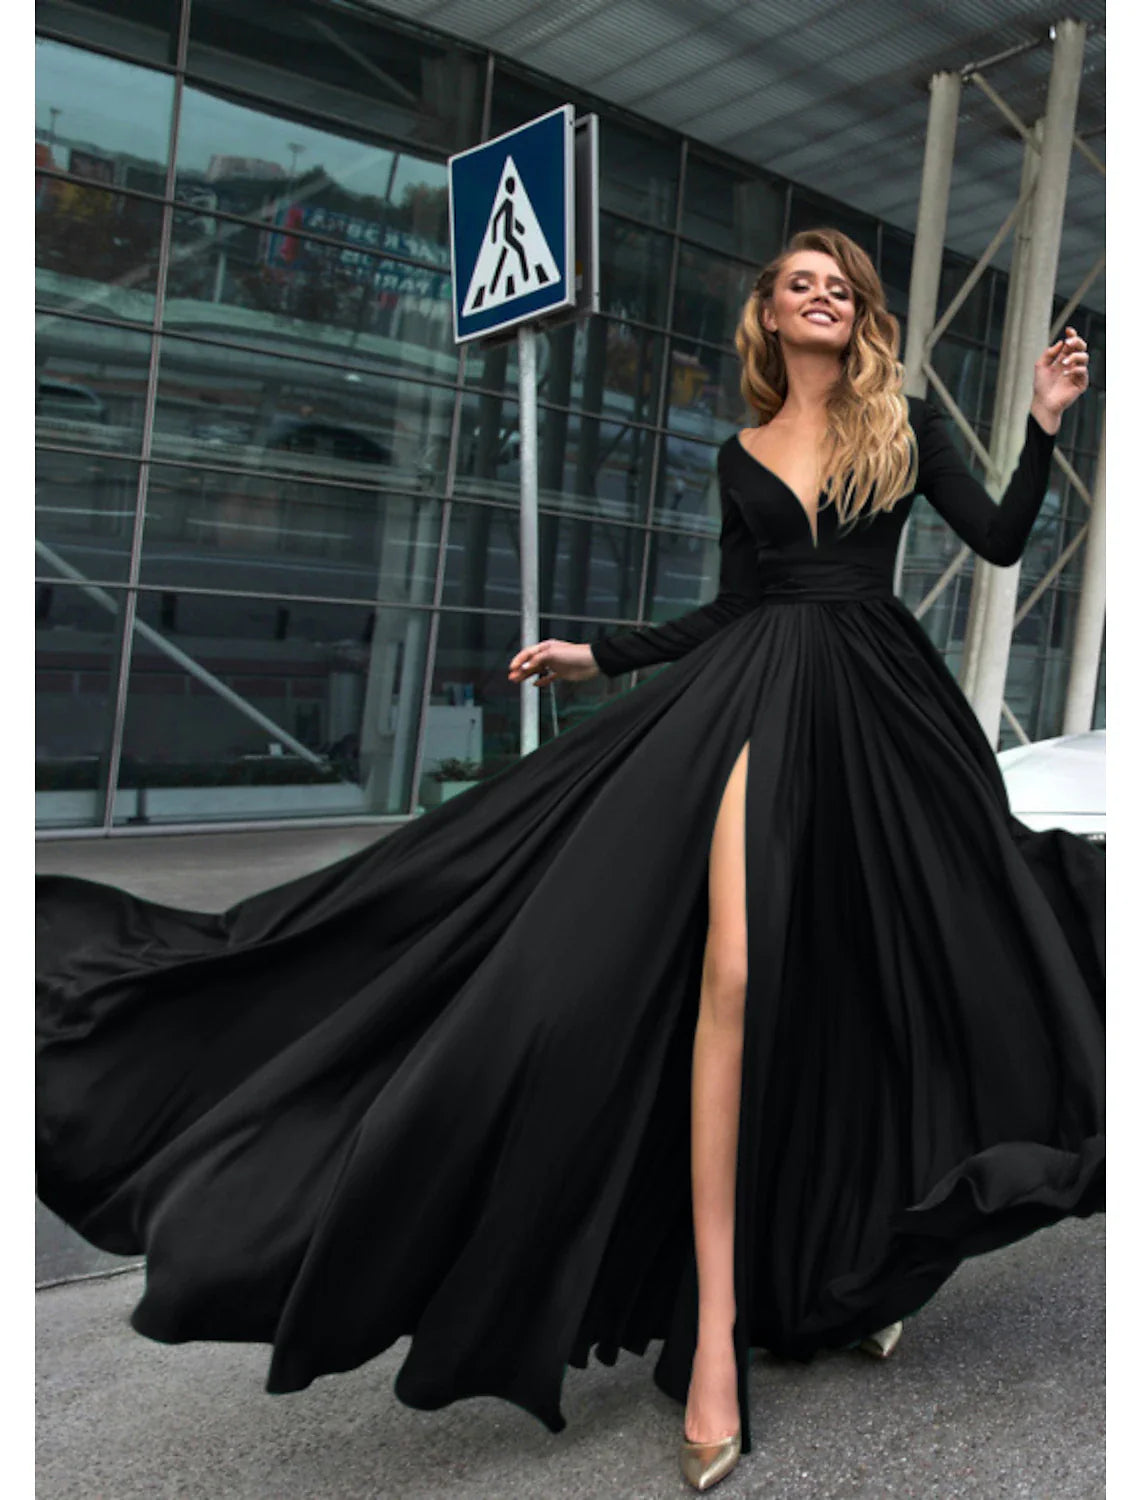 A-Line Evening Gown Empire Black Dress Plus Size Holiday Wedding Guest Floor Length Long Sleeve V Neck Chiffon V Back with Slit Pure Color